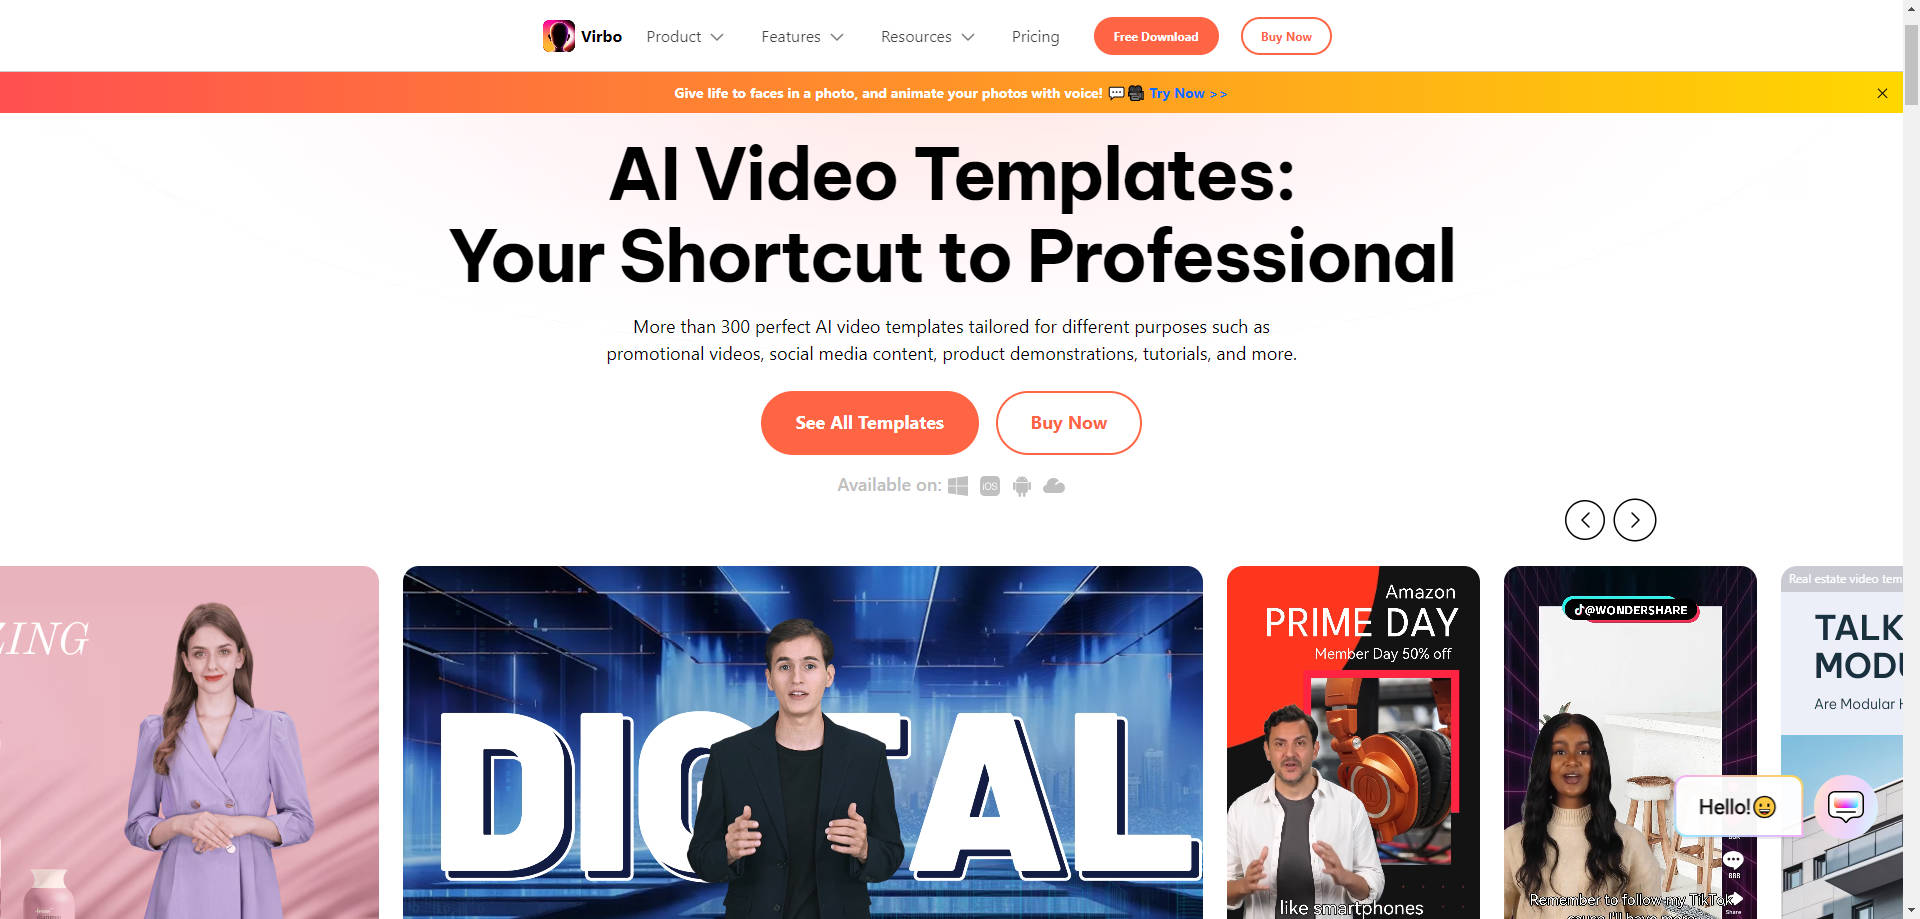 virbo’s ai video templates